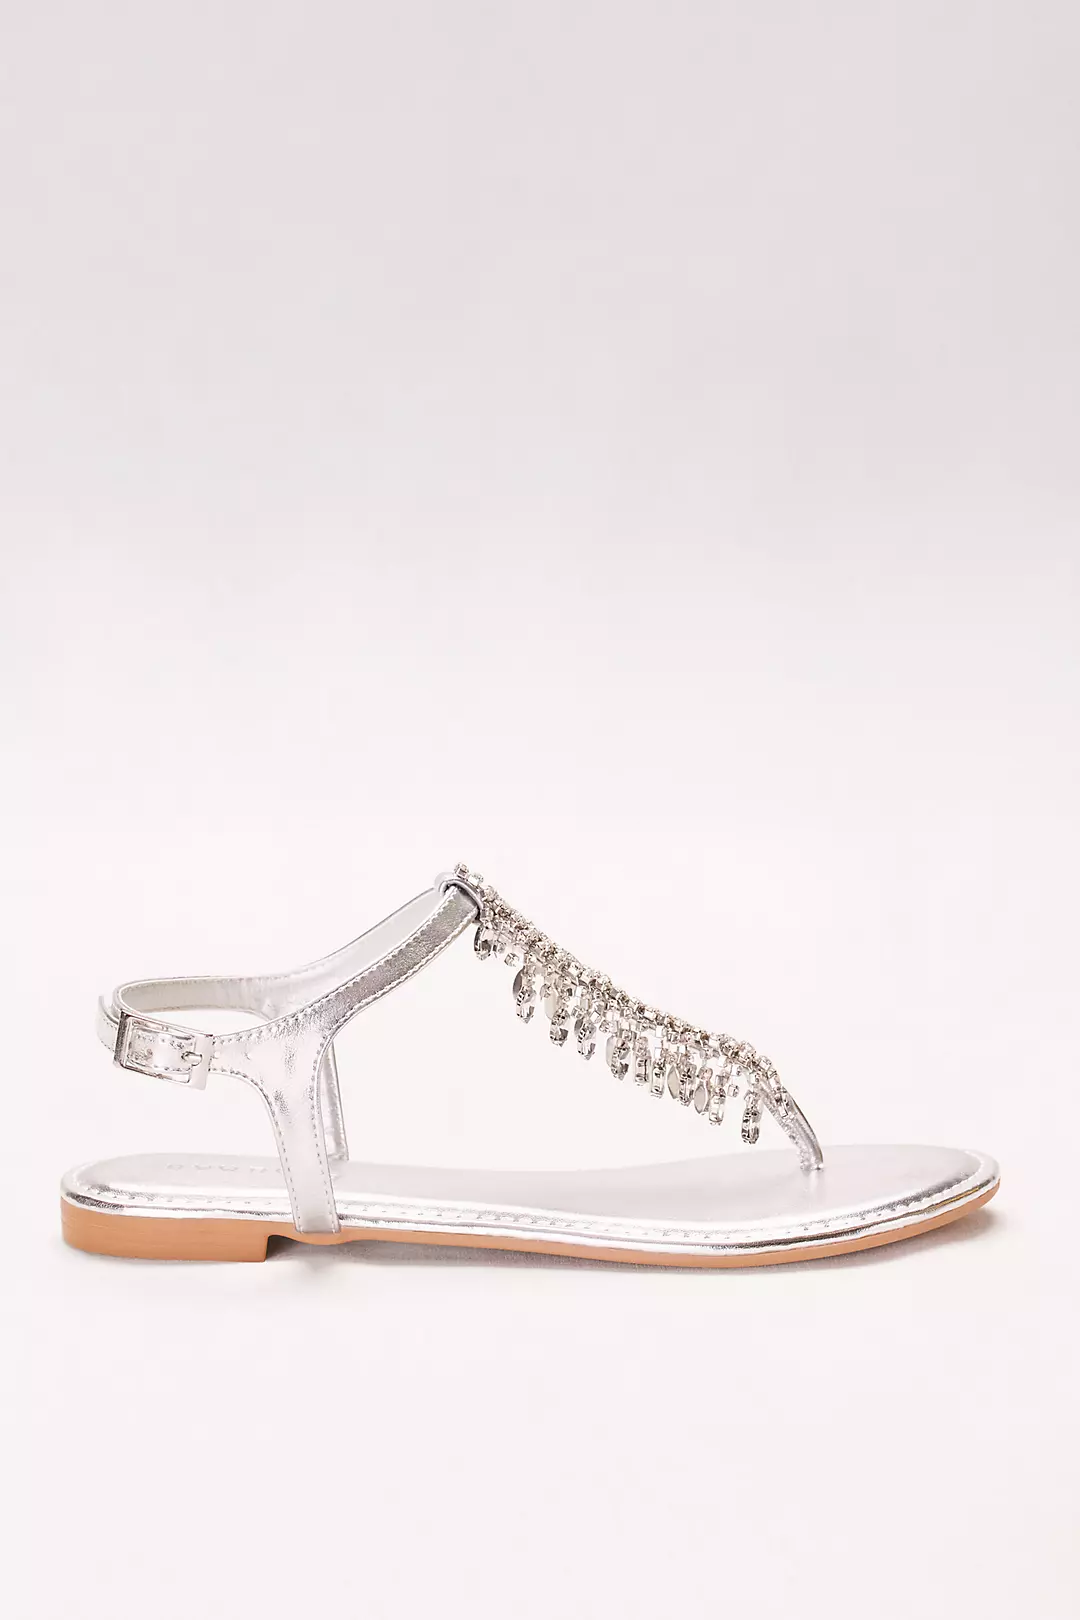 Metallic T-Strap Sandals with Dripping Crystals Image 3